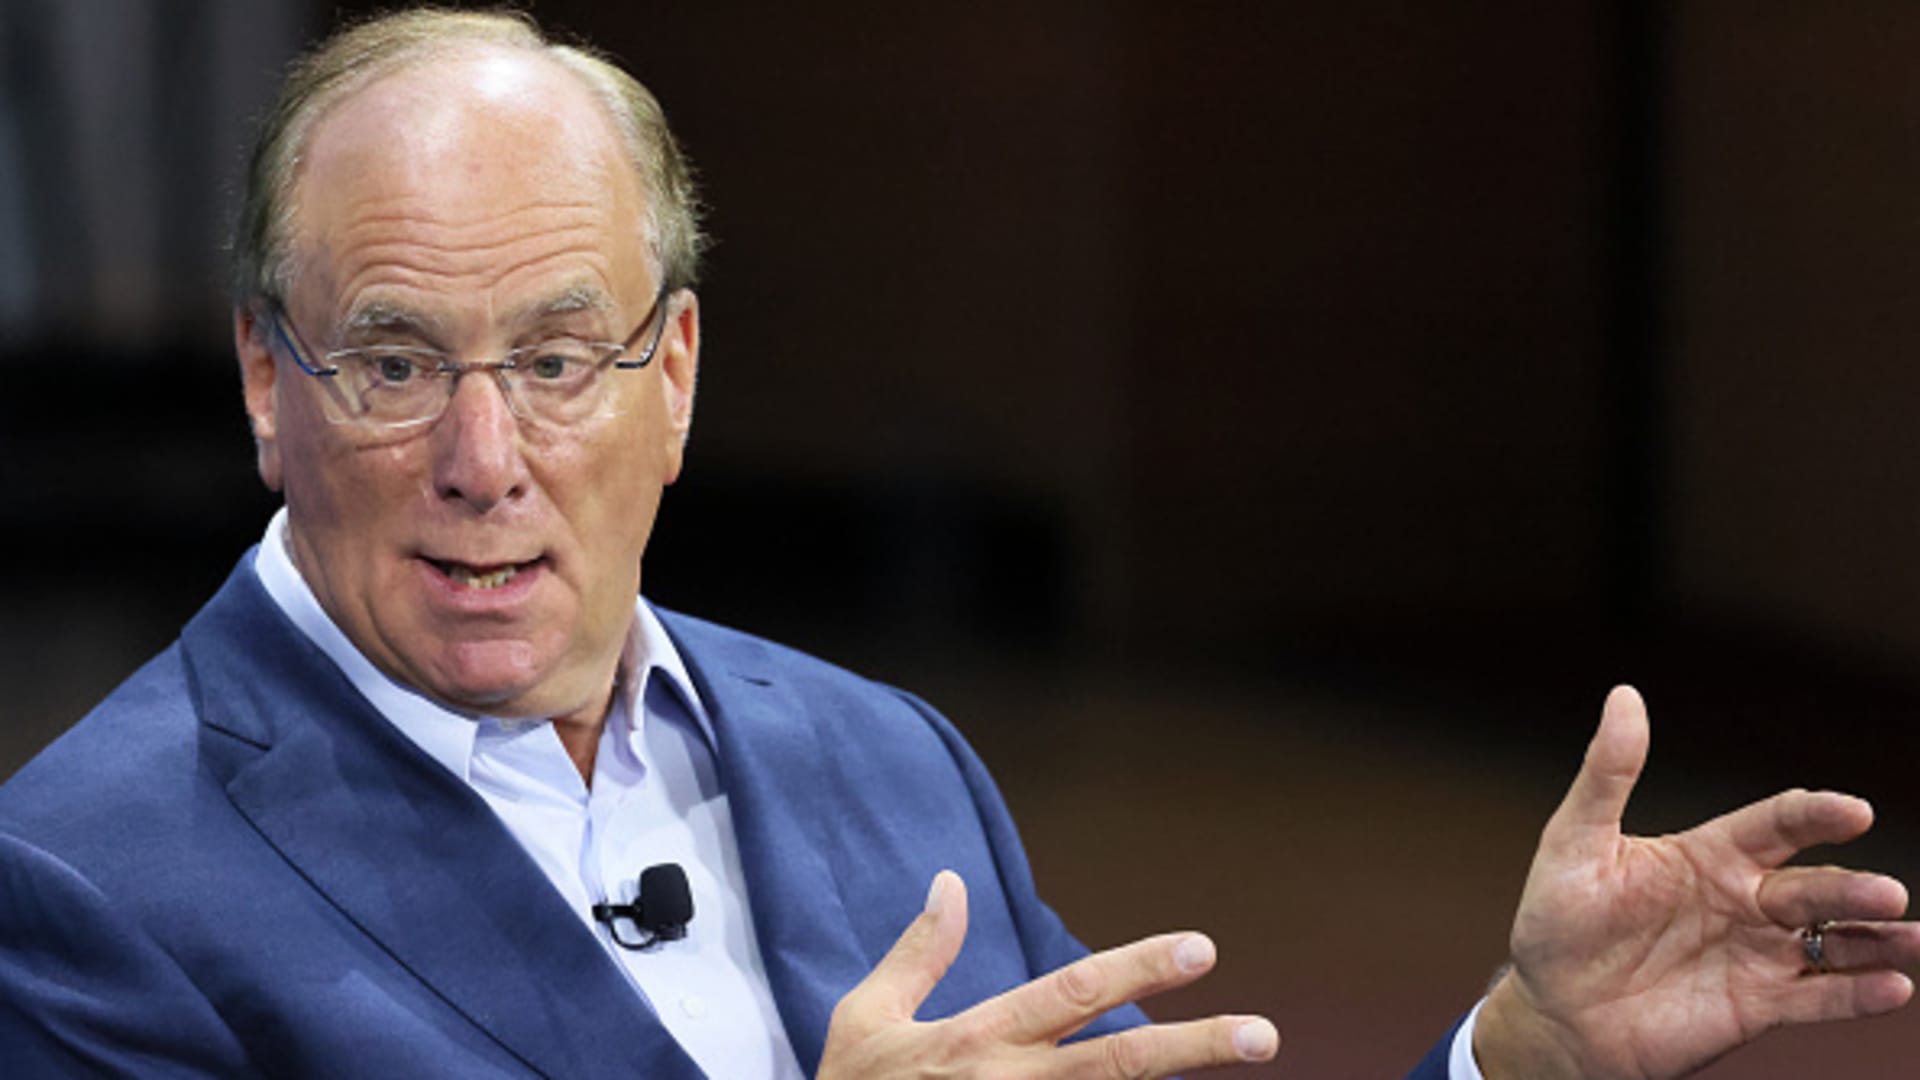 Larry Fink says more bank seizures could come, but it’s too early to know how widespread crisis is